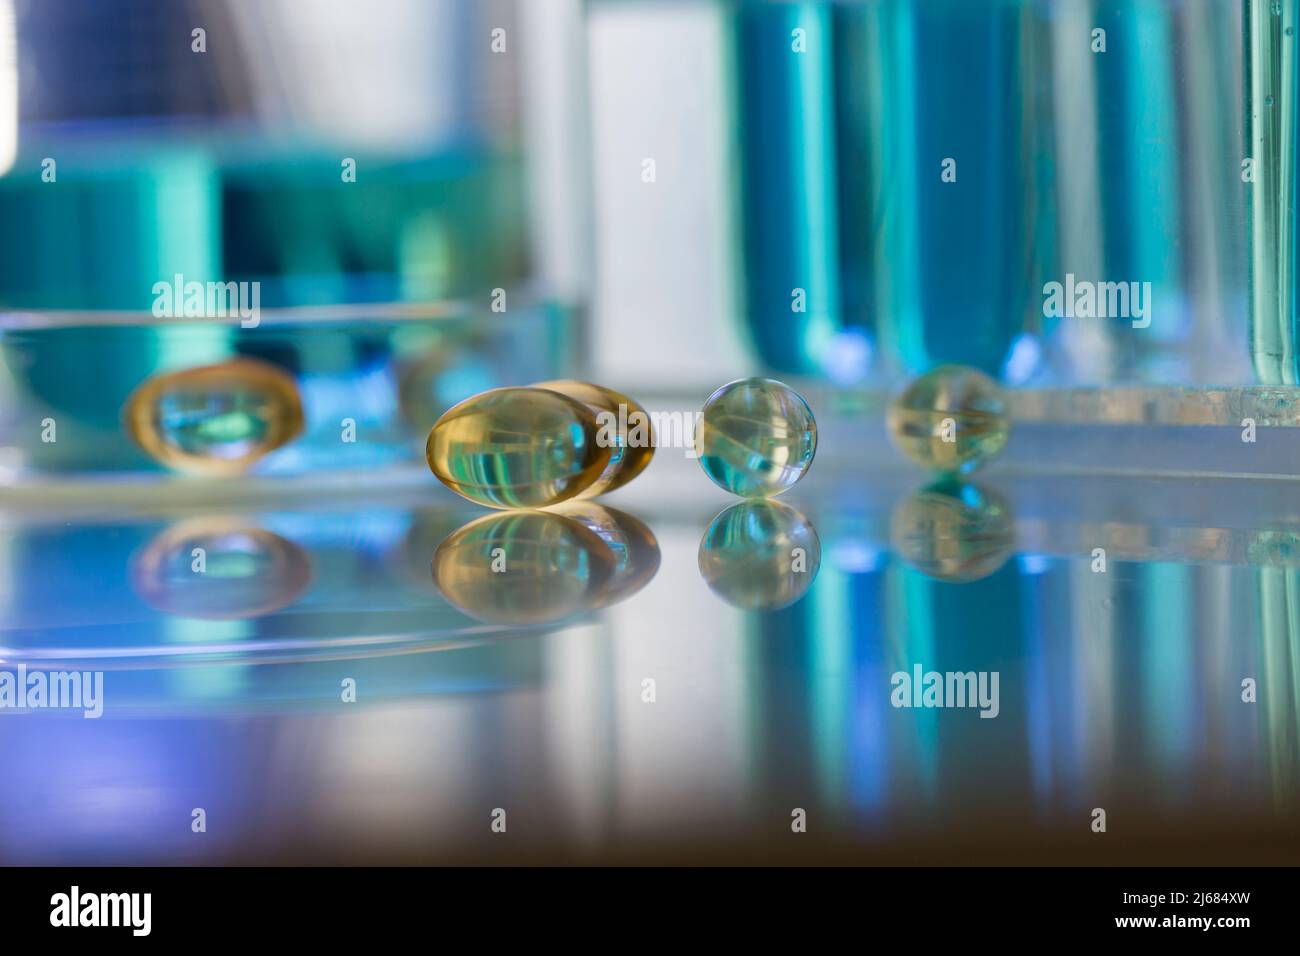 Soft capsules are scattered on the drug ingredient testing bench - stock photo Stock Photo